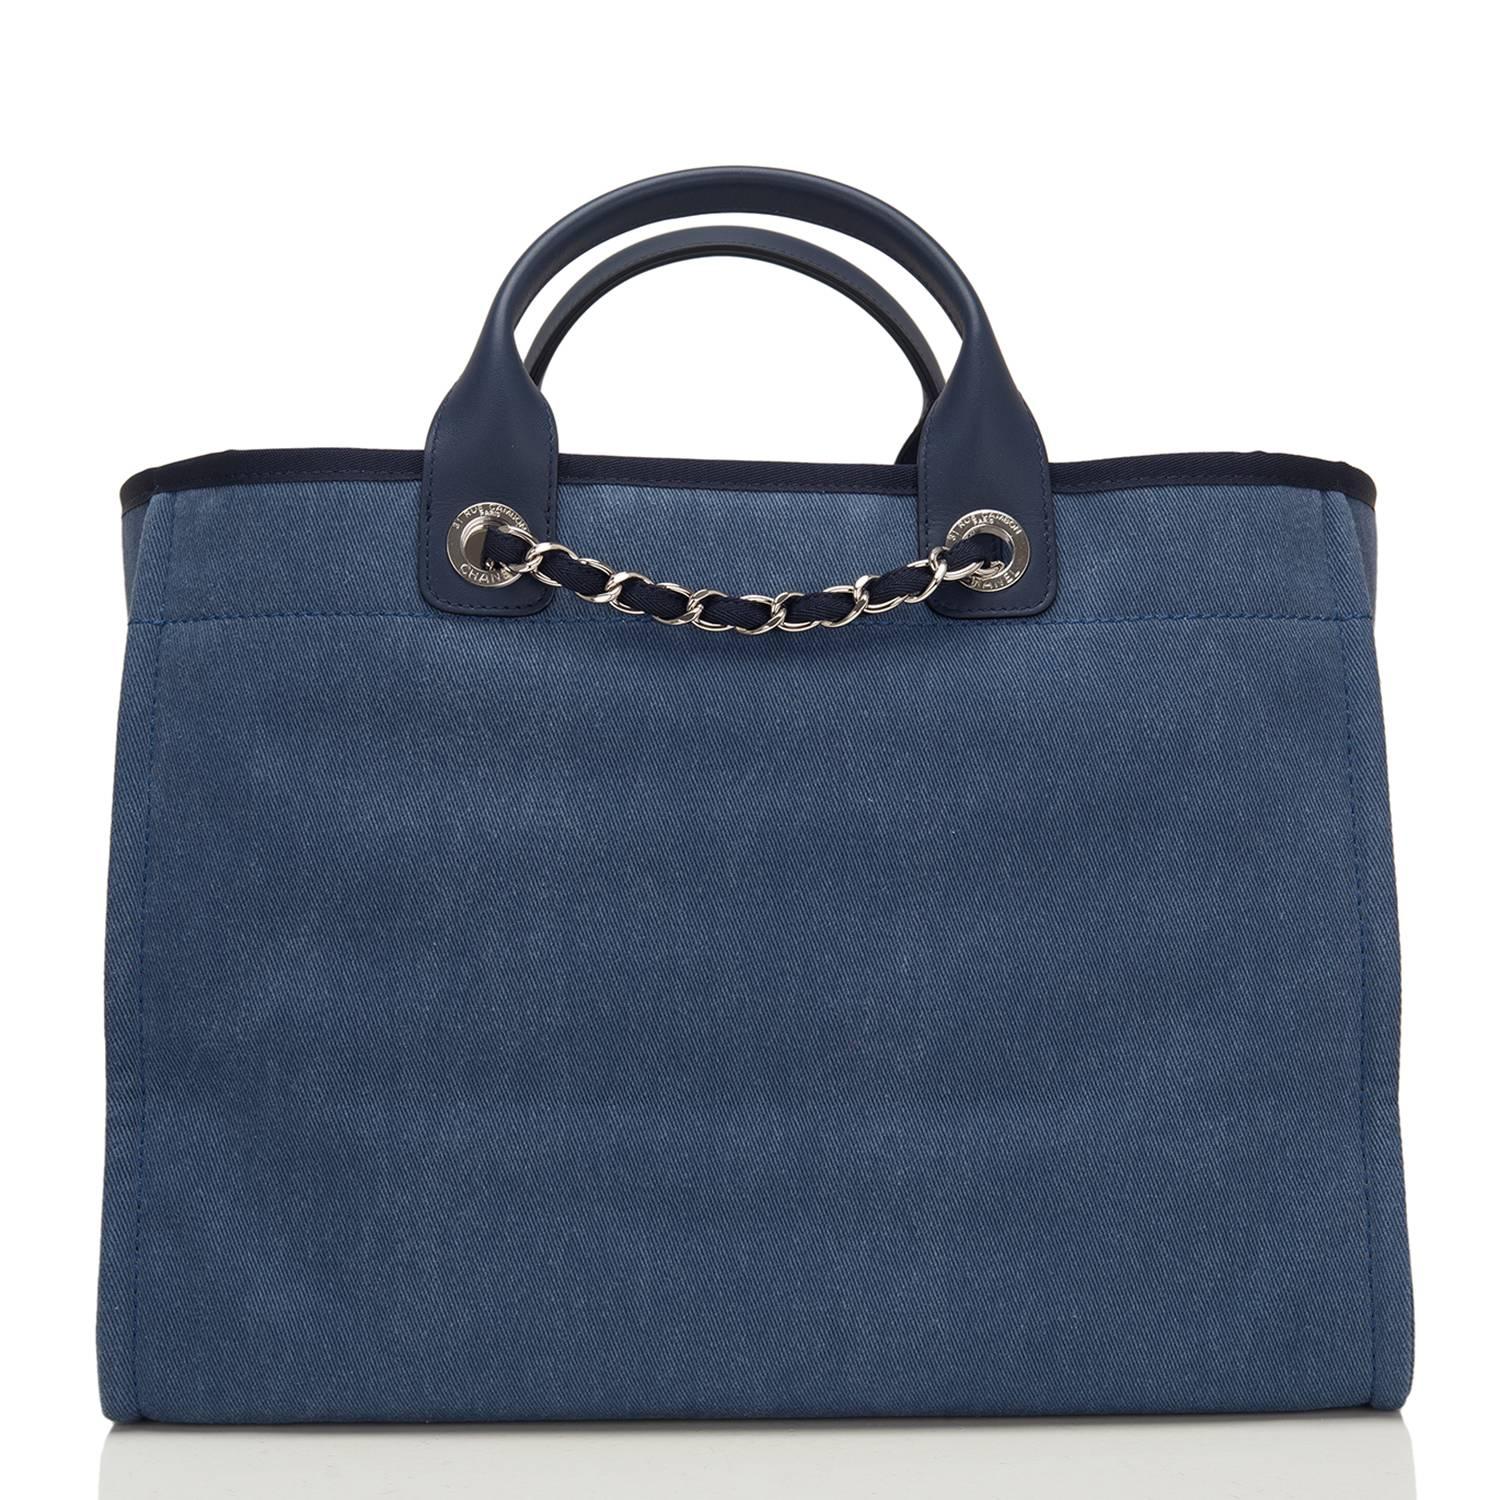 Chanel Large Navy Canvas With Sequins Deauville Tote In New Condition For Sale In New York, NY